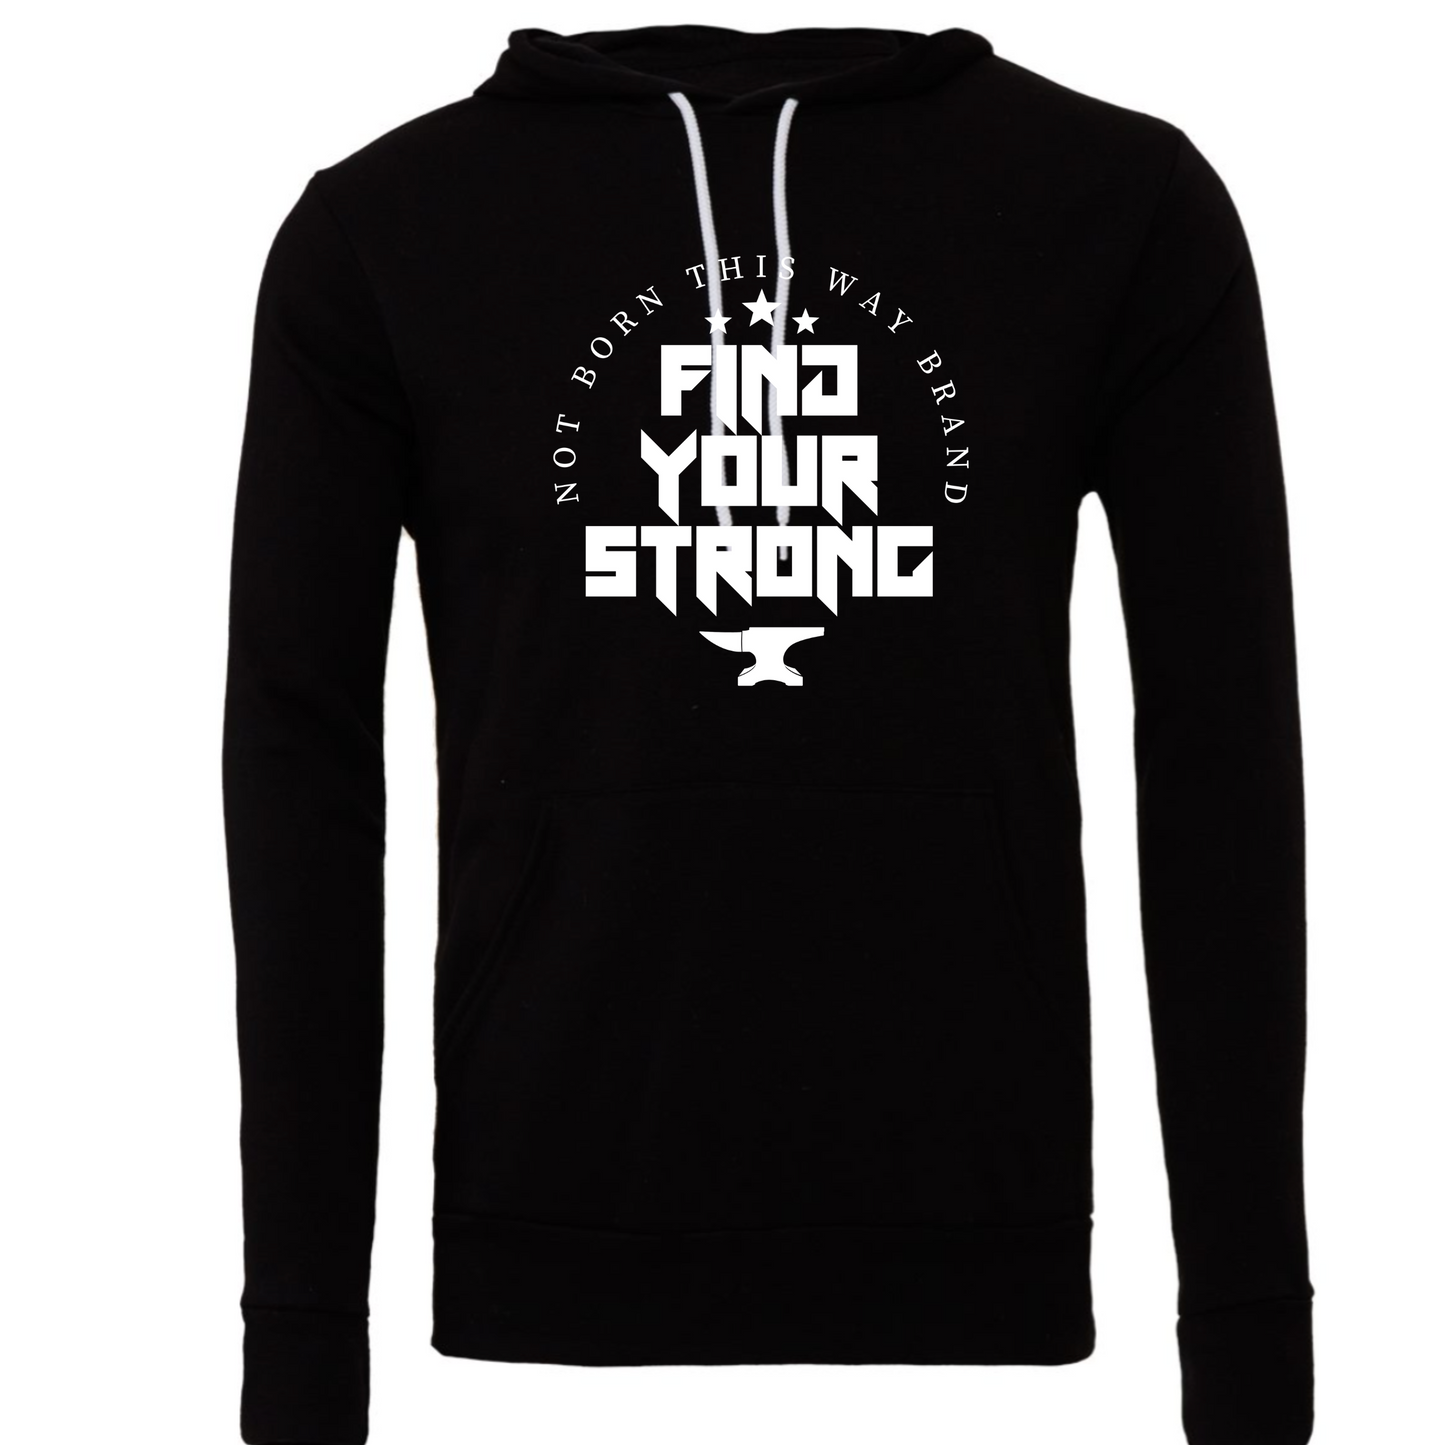 FIND YOUR STRONG - Fleece pullover hoodie